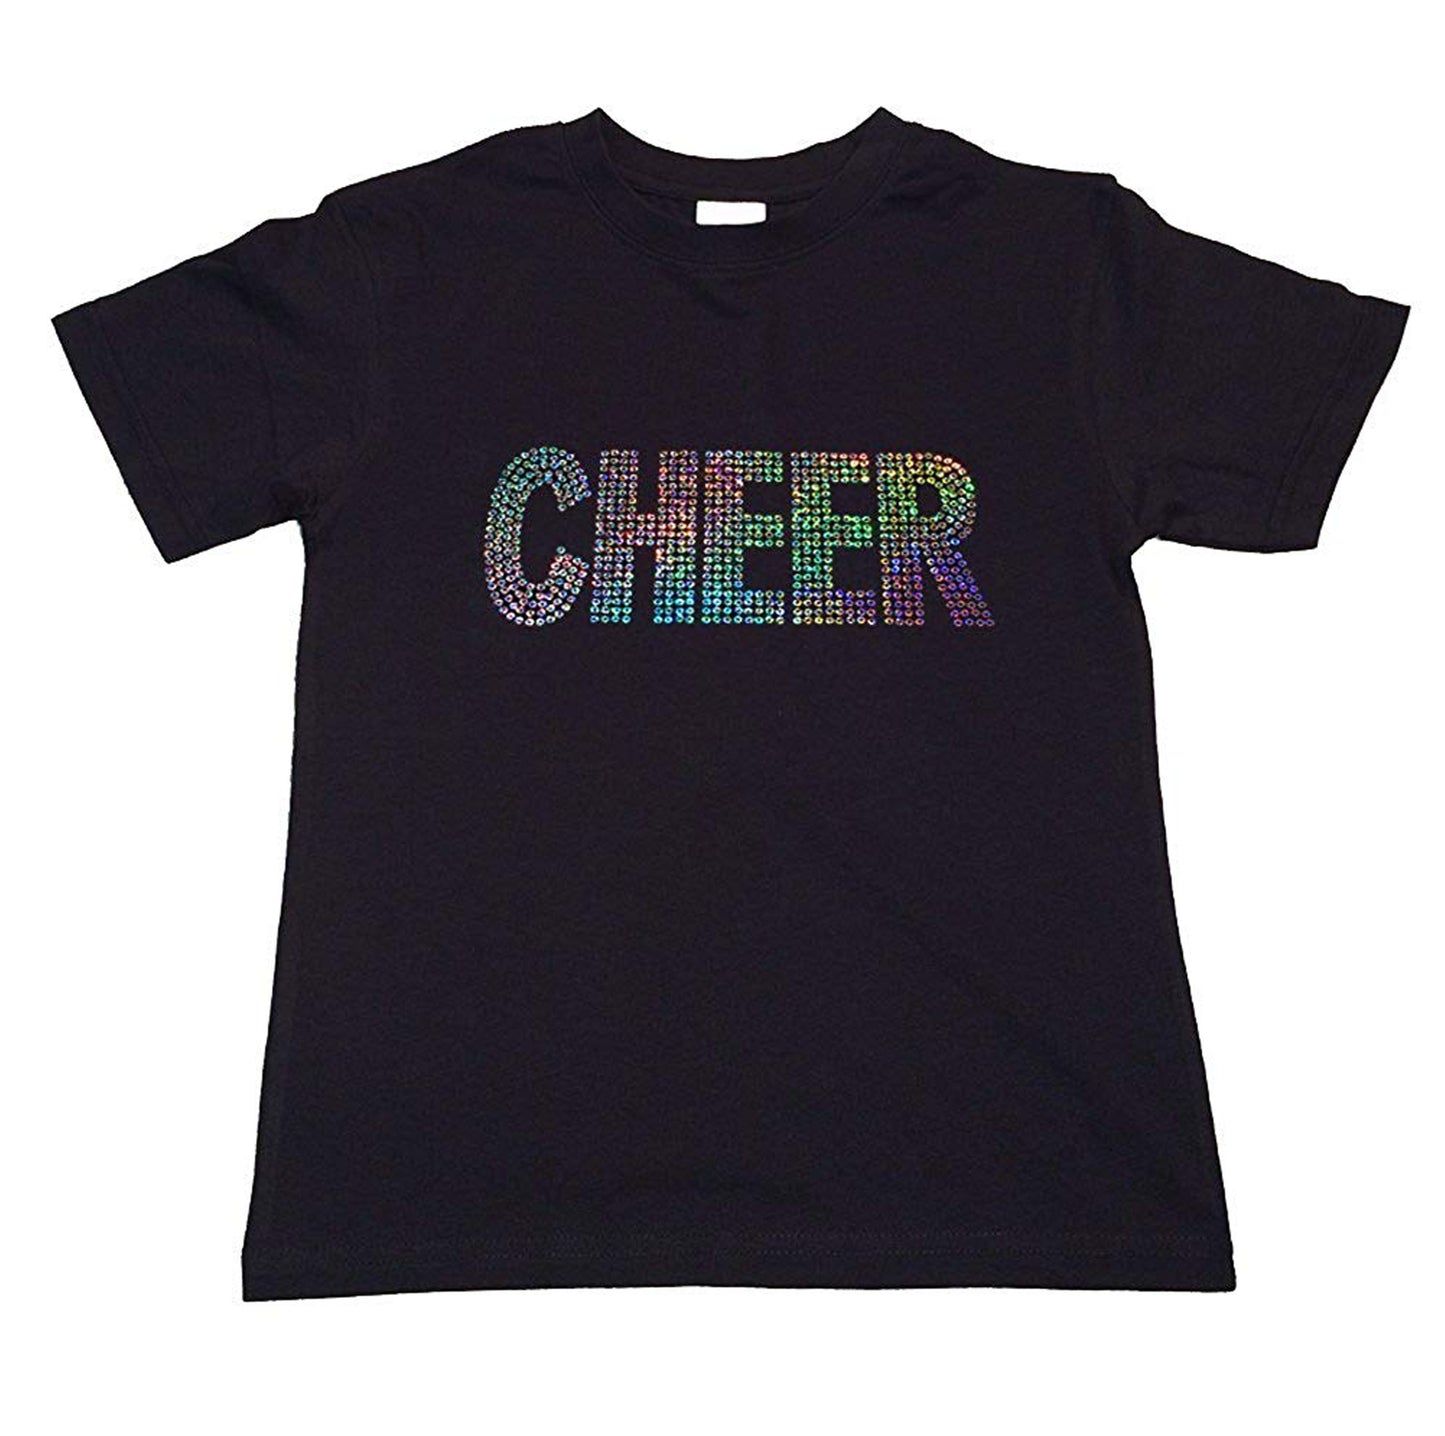 Girls Sequence T-Shirt " Cheer " Size 3 to 14 Available, Cheerleader AB Sequence